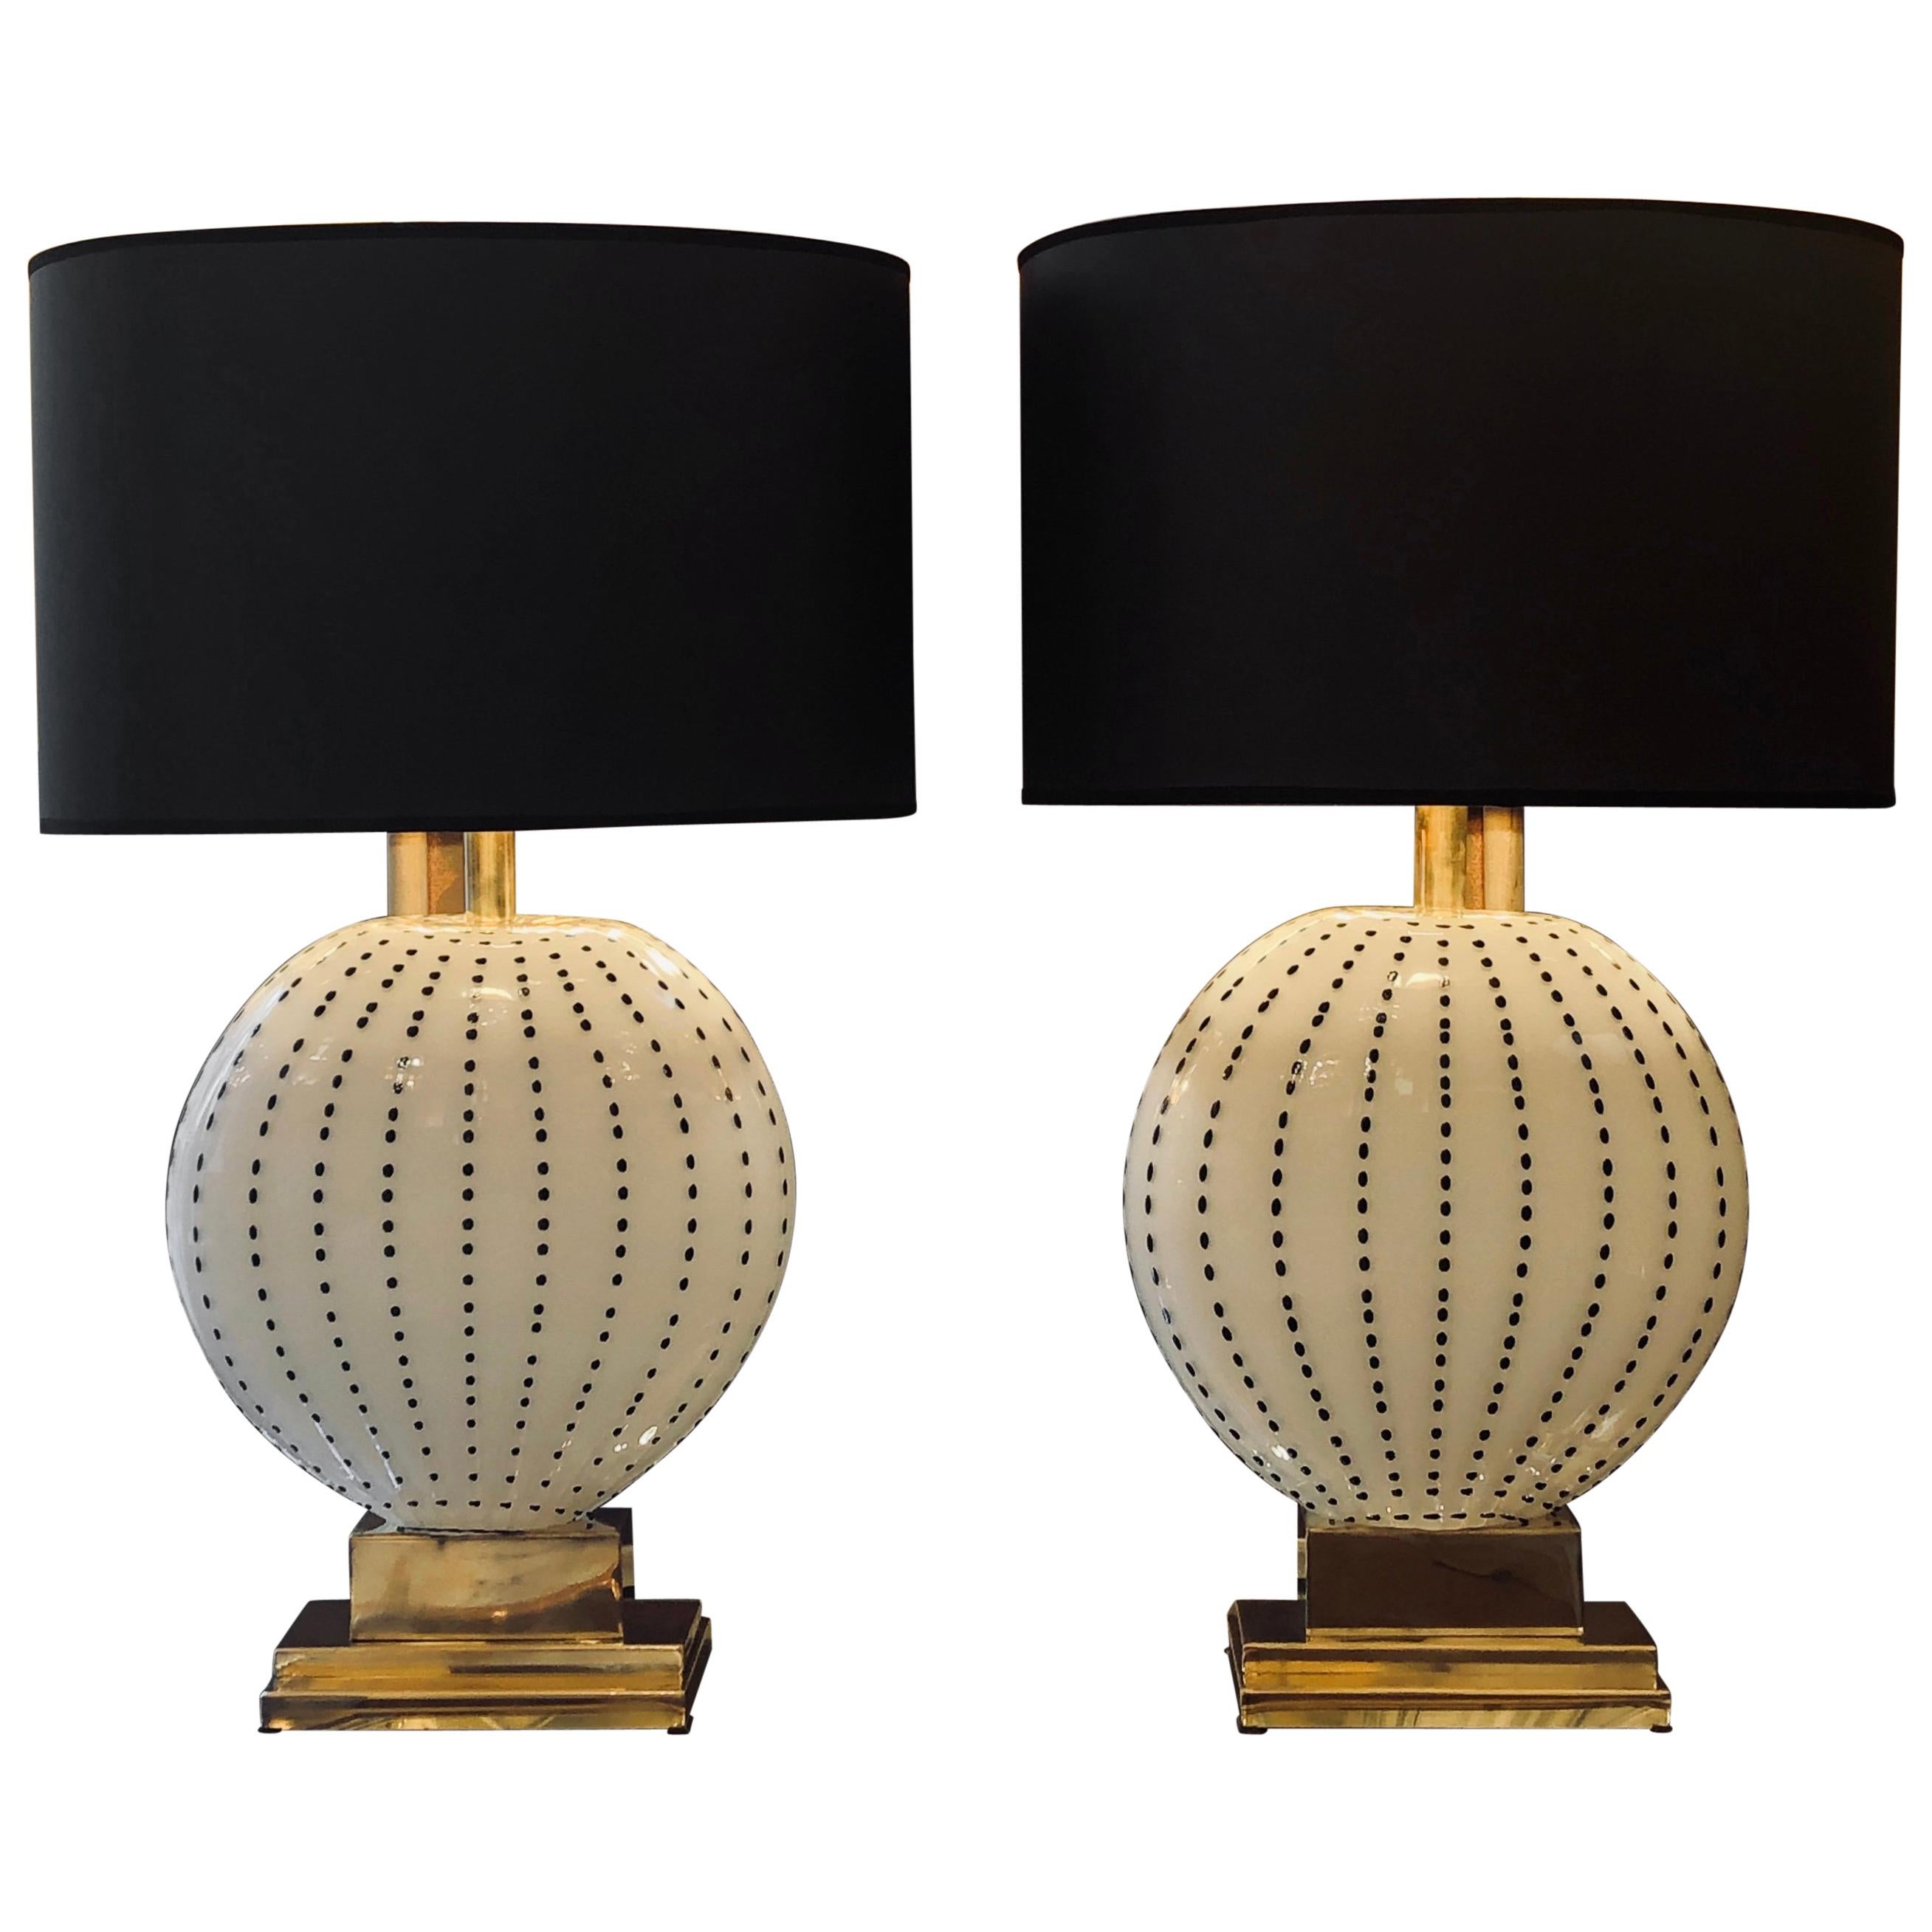 Late 20th Century Pair of White with Black Dots Murano Glass & Brass Table Lamps